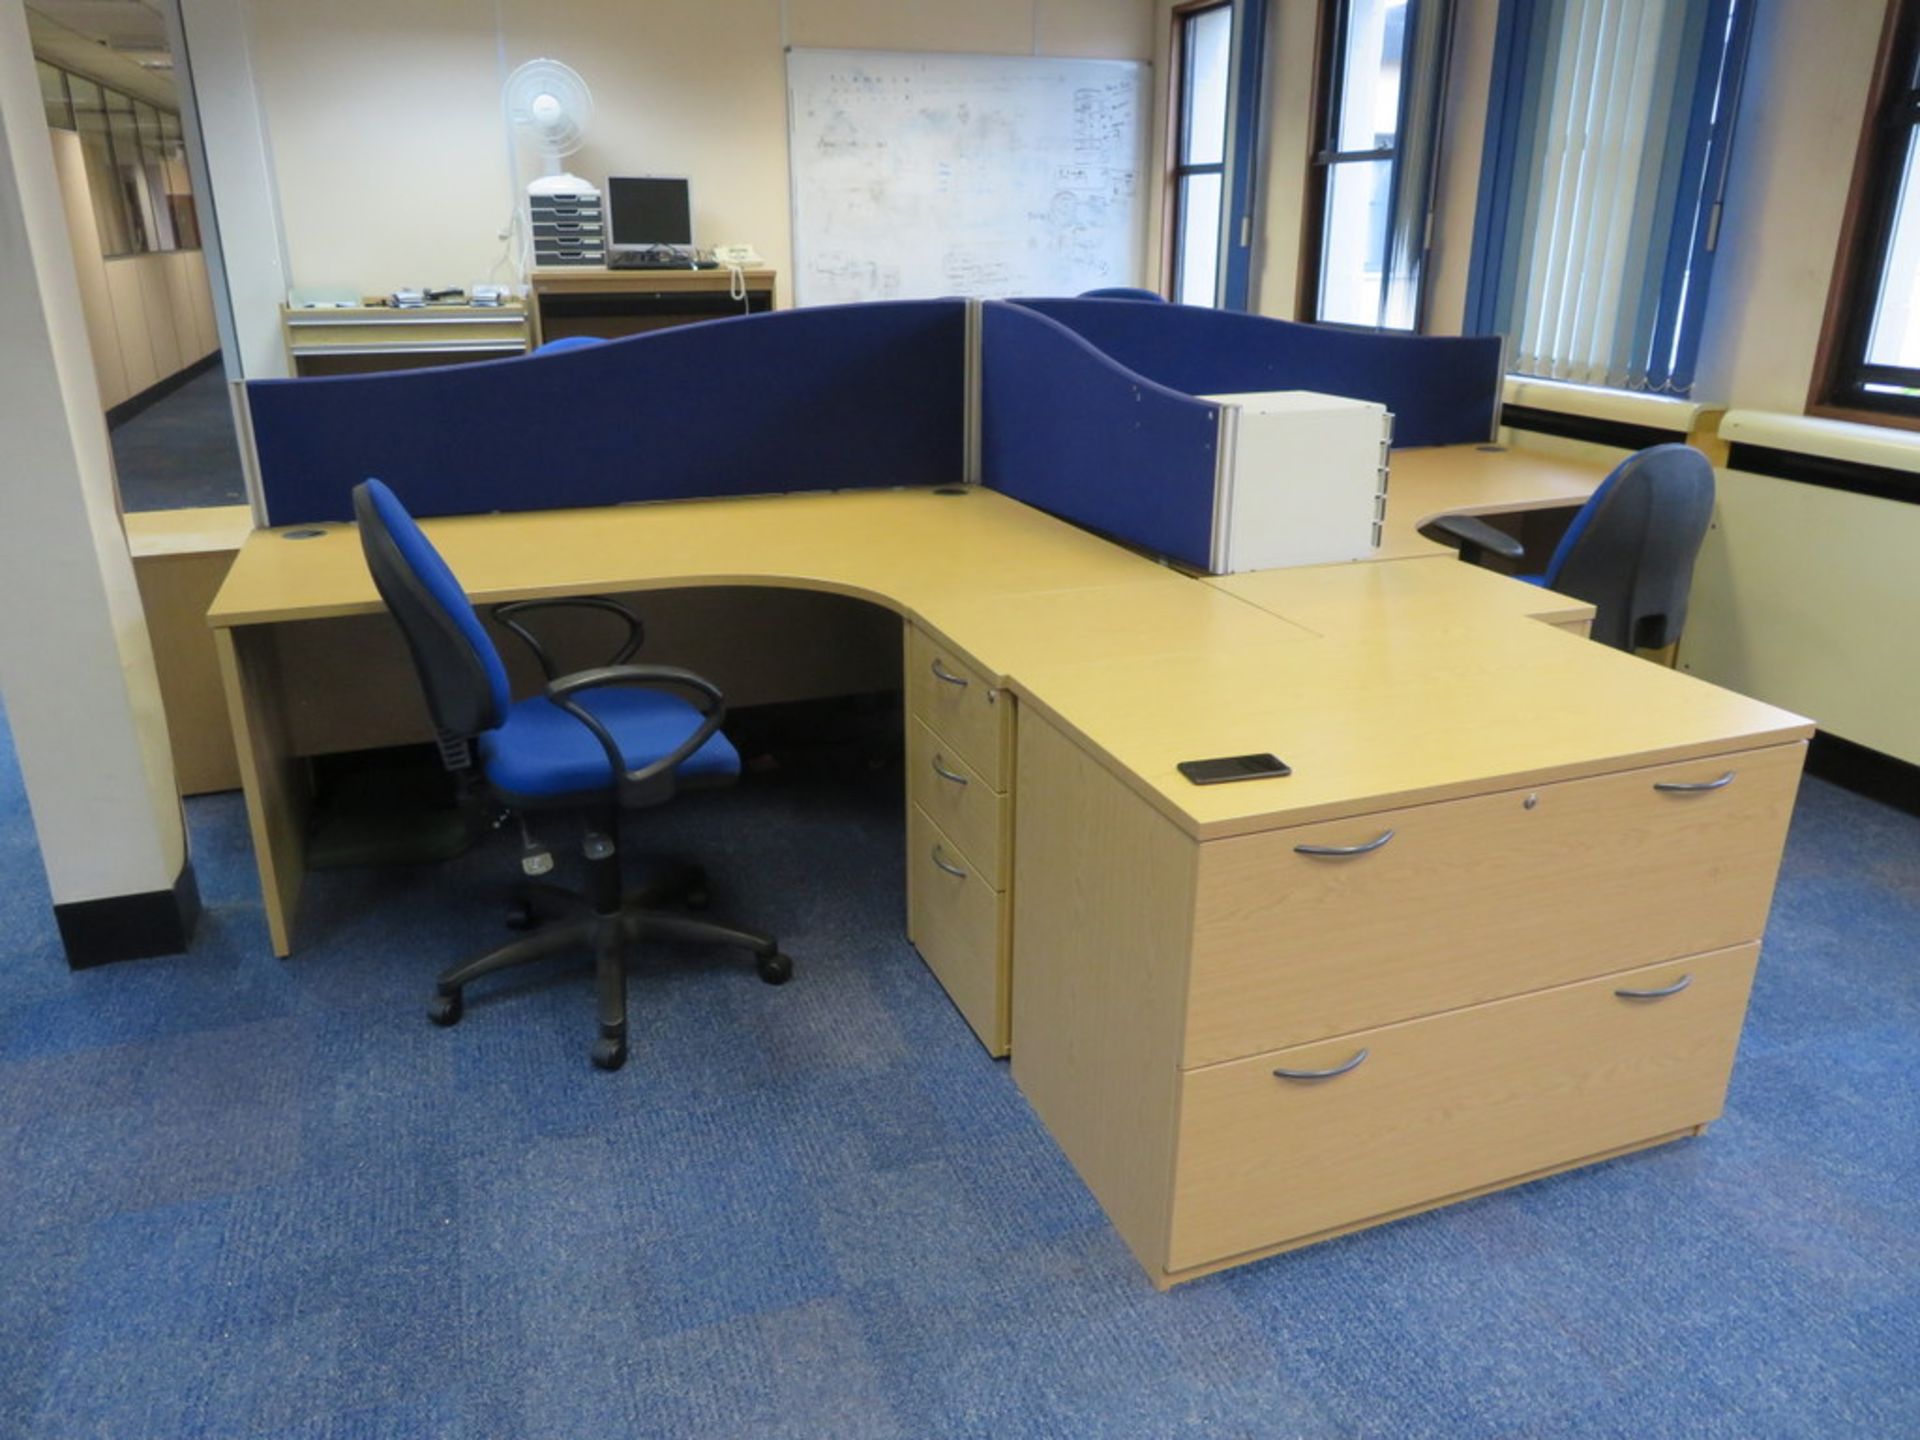 4 X LIGHTWOOD EFFECT L-SHAPED OFFICE DESKS, 8 X VARIOUS THREE DRAWER PEDESTALS - Image 2 of 3